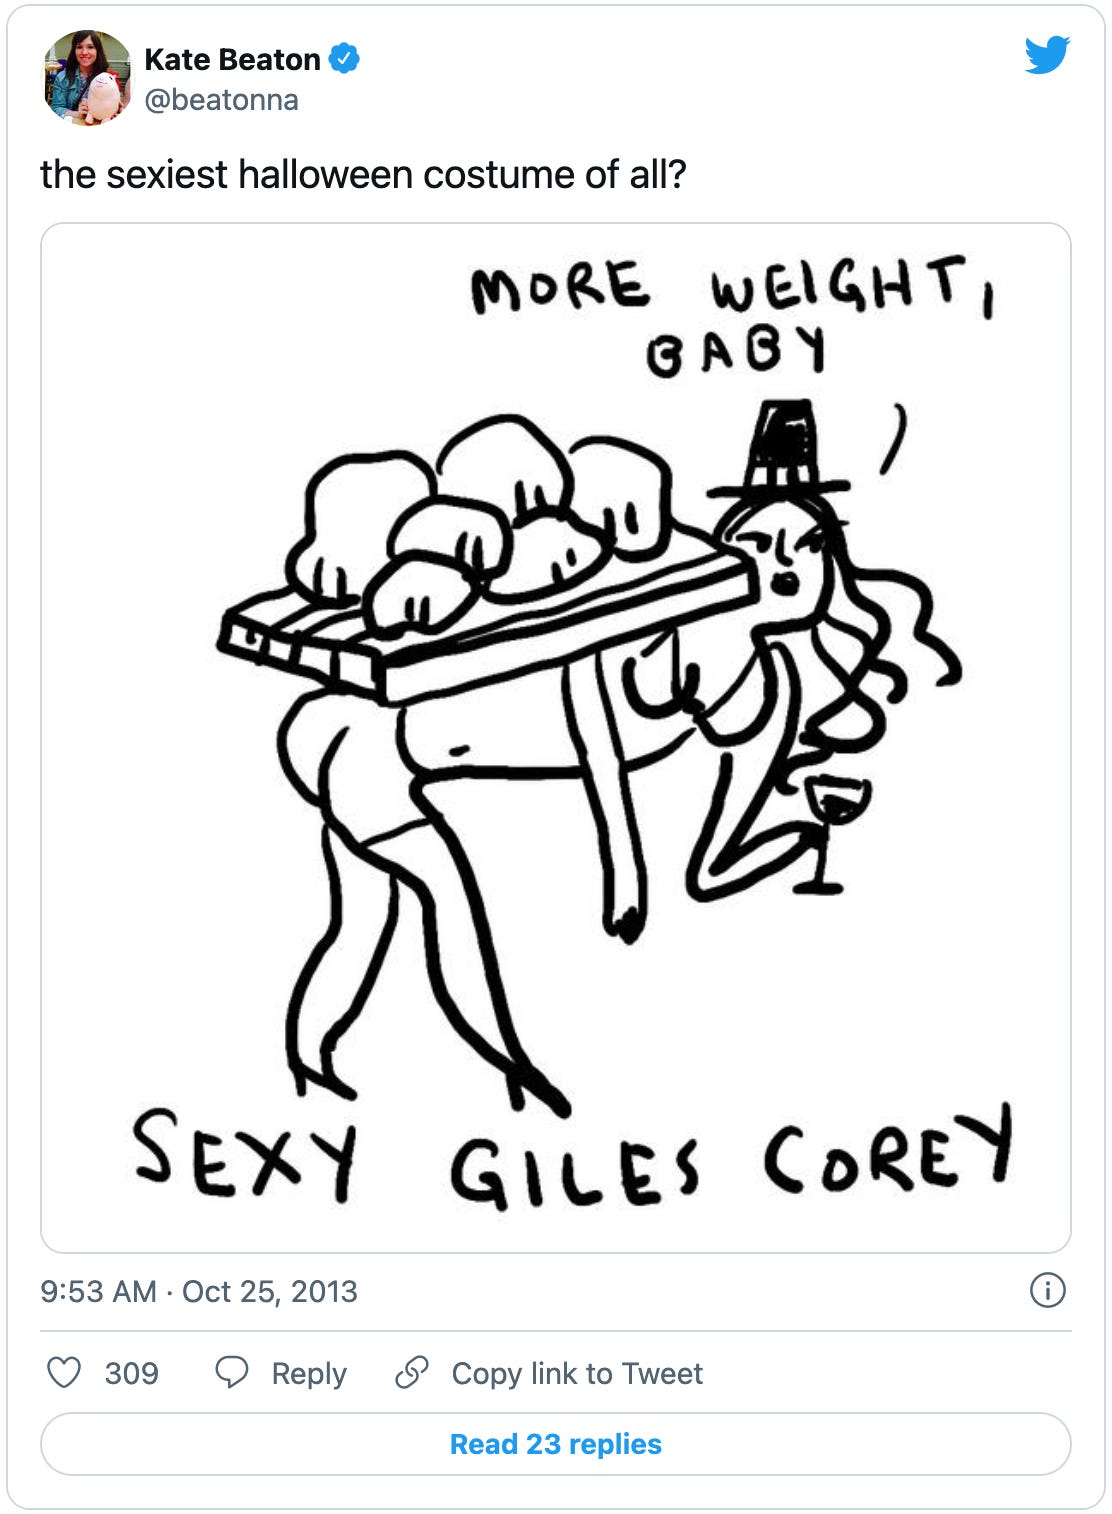 Tweet from Kate Beaton (@beatonna) that says “the sexiest halloween costume of all?” and has a cartoon of a woman in underwear, bent down under a plank on her back with rocks on it, wearing a colonial bucked hat and holding a glass of wine. The cartoon is captioned “Sexy Giles Corey” and the woman is saying “More weight, baby.”